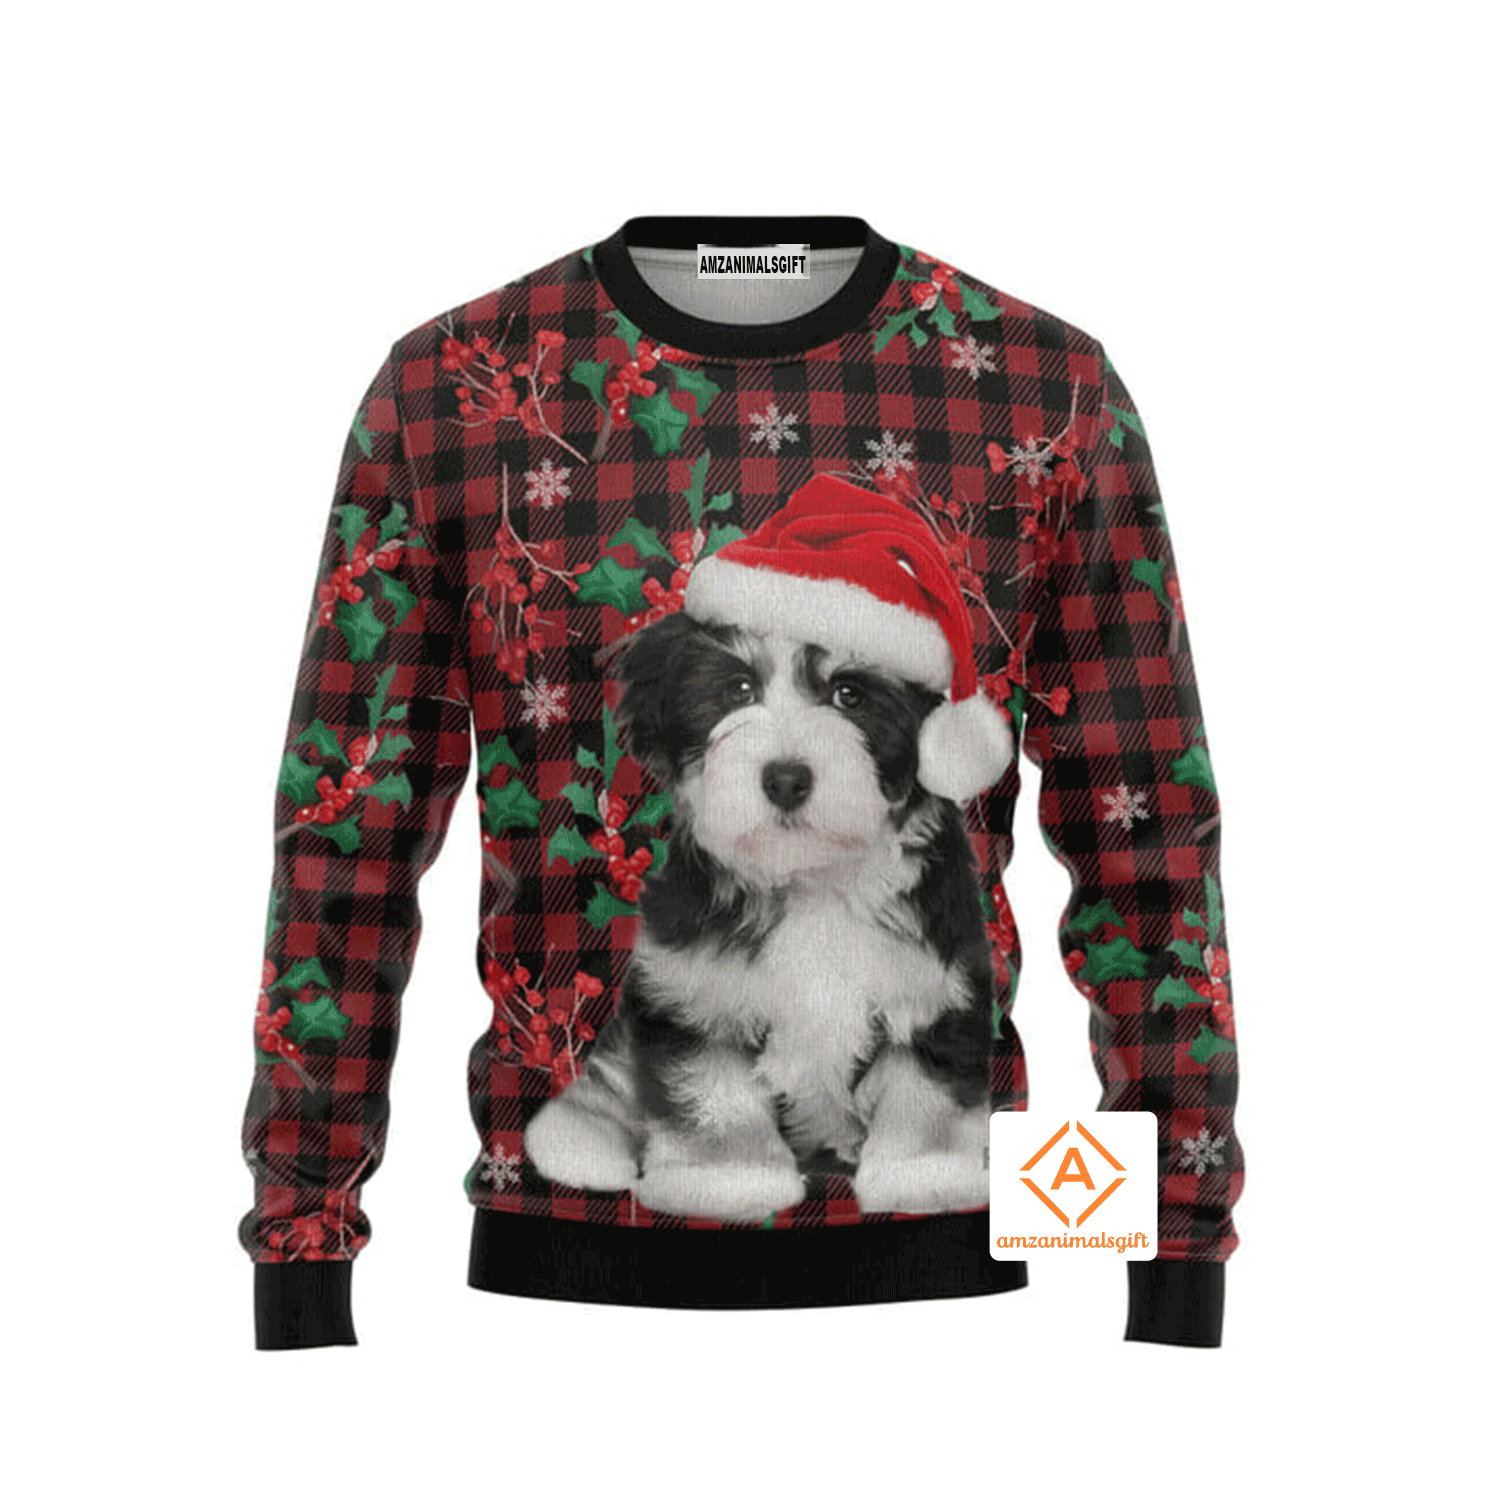 Bichon Havanese Dog Christmas Sweater, Ugly Sweater For Men & Women, Perfect Outfit For Christmas New Year Autumn Winter